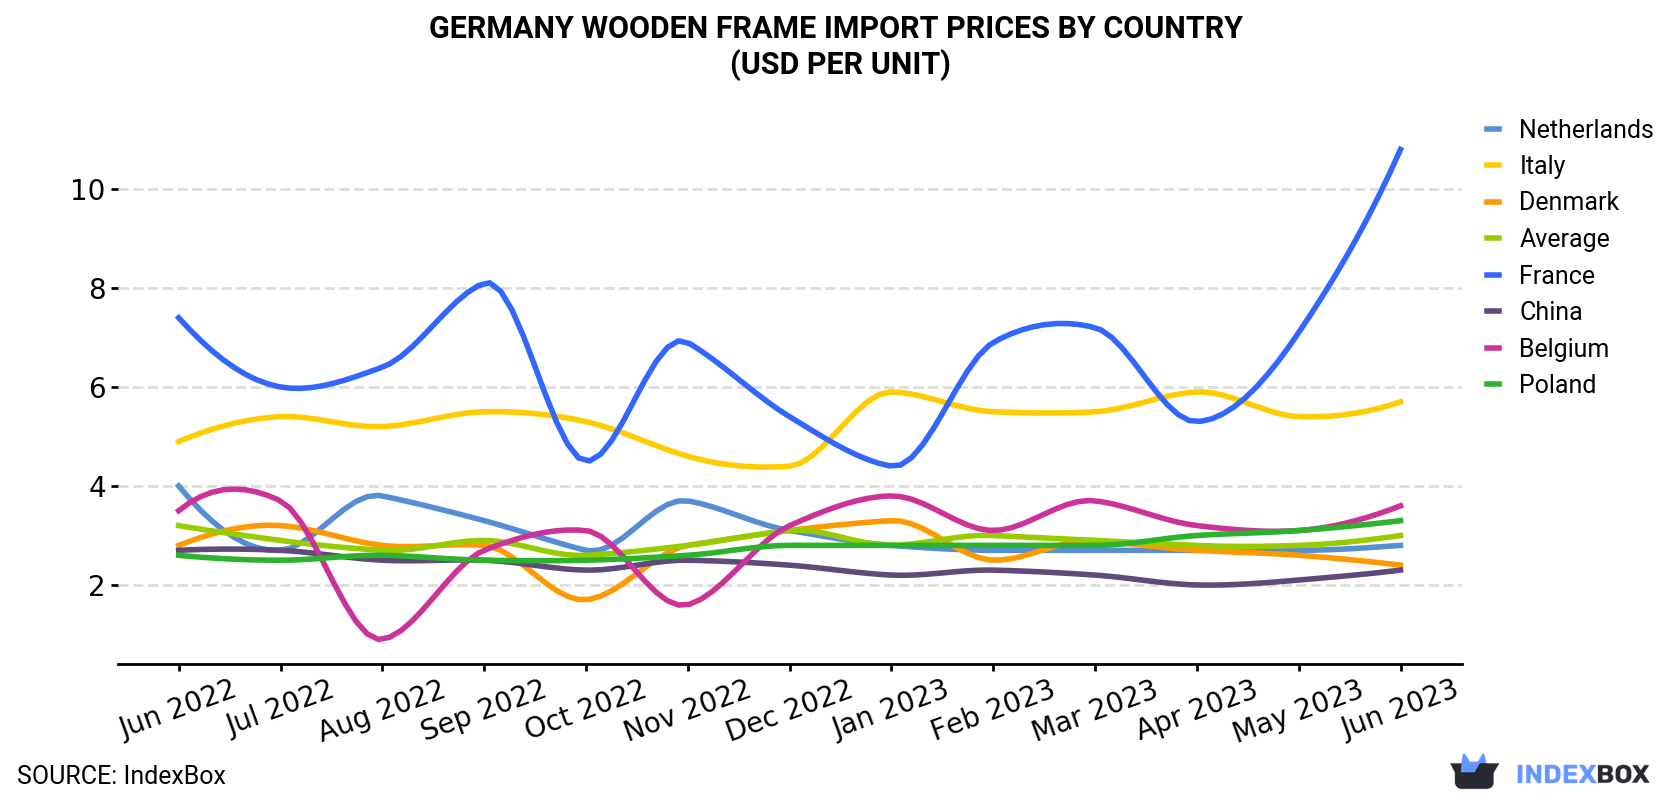 Germany Wooden Frame Import Prices By Country (USD Per Unit)